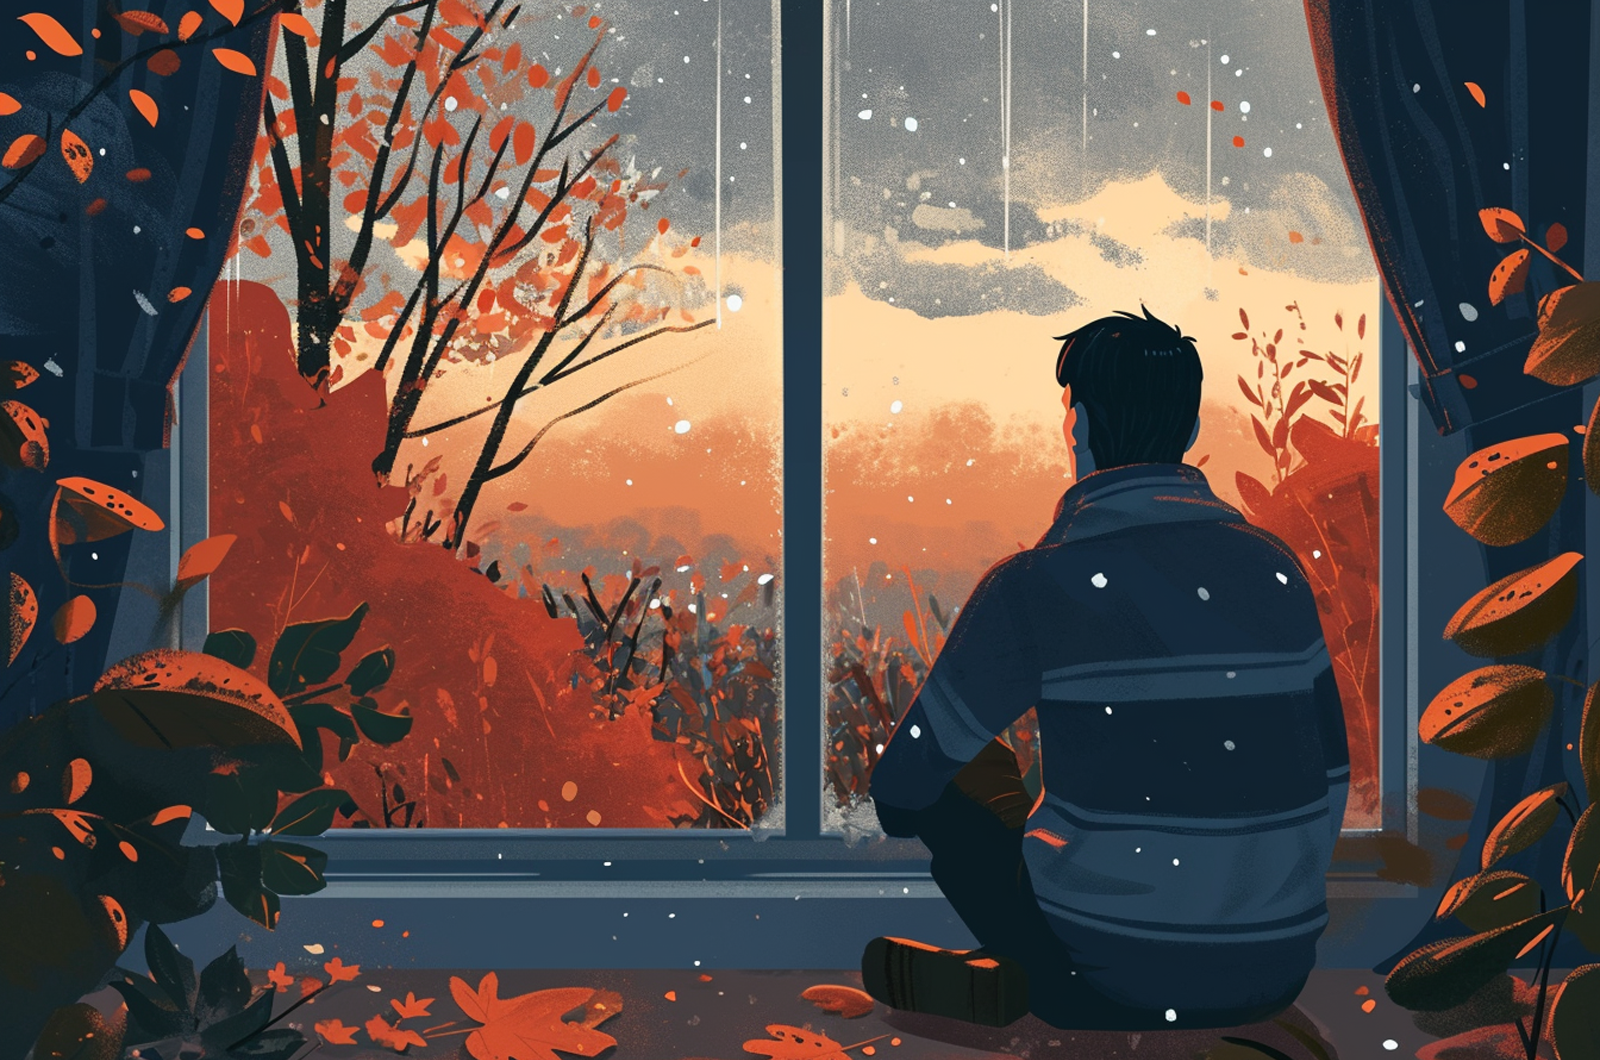 A man sits in front of a window, enjoying the natural scenic beauty